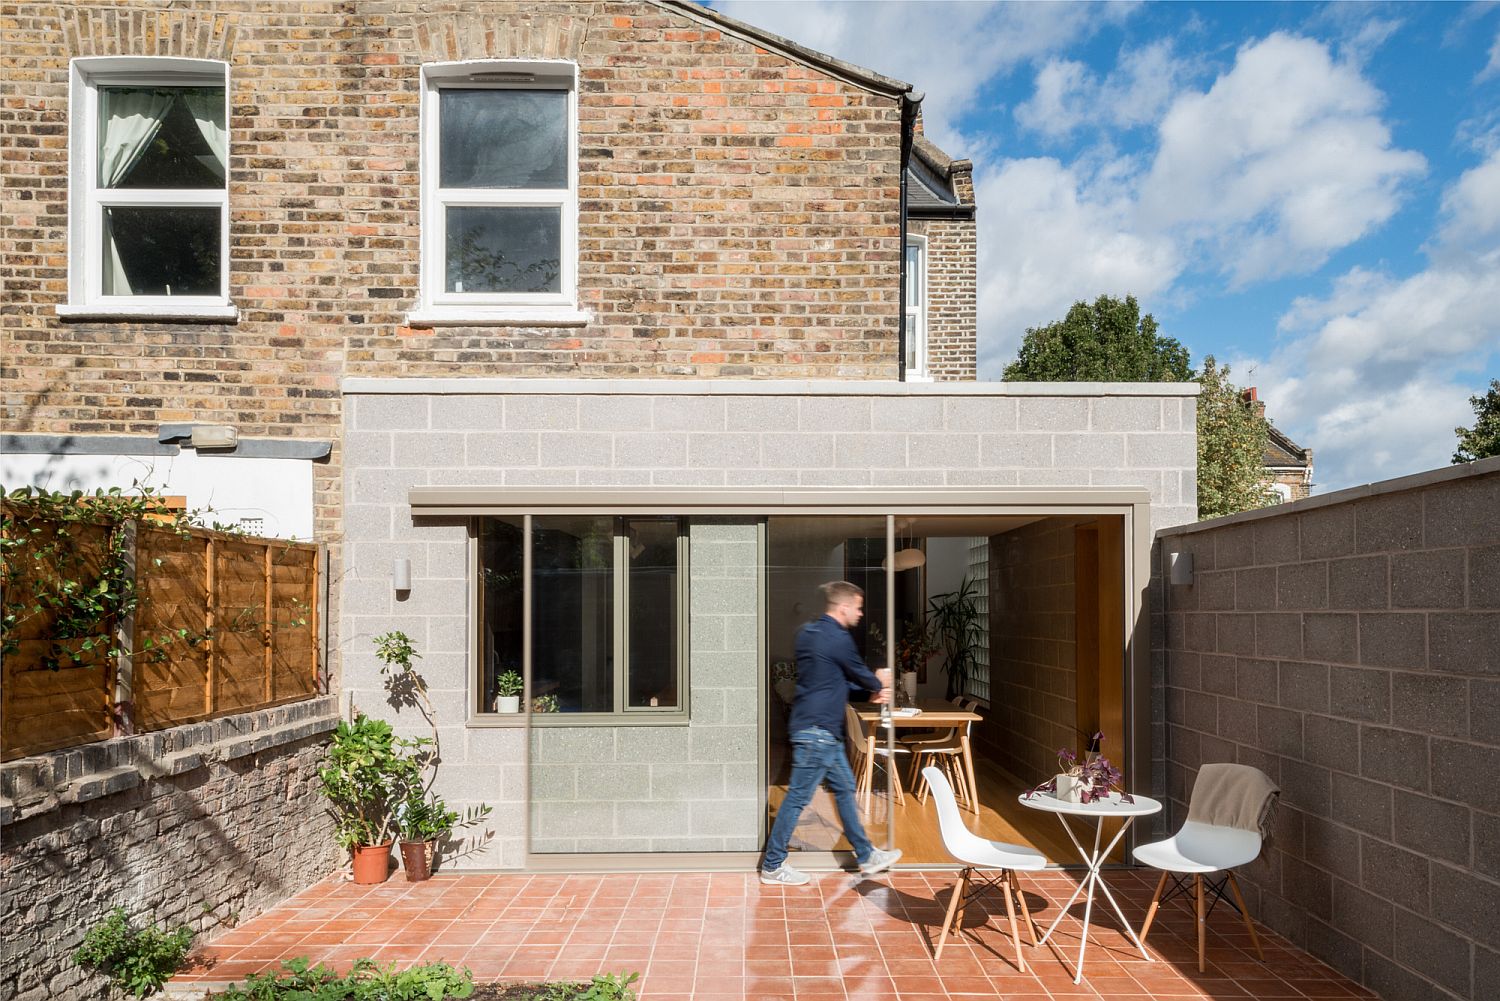 Old brick structure of the house combined with a textural modern extension